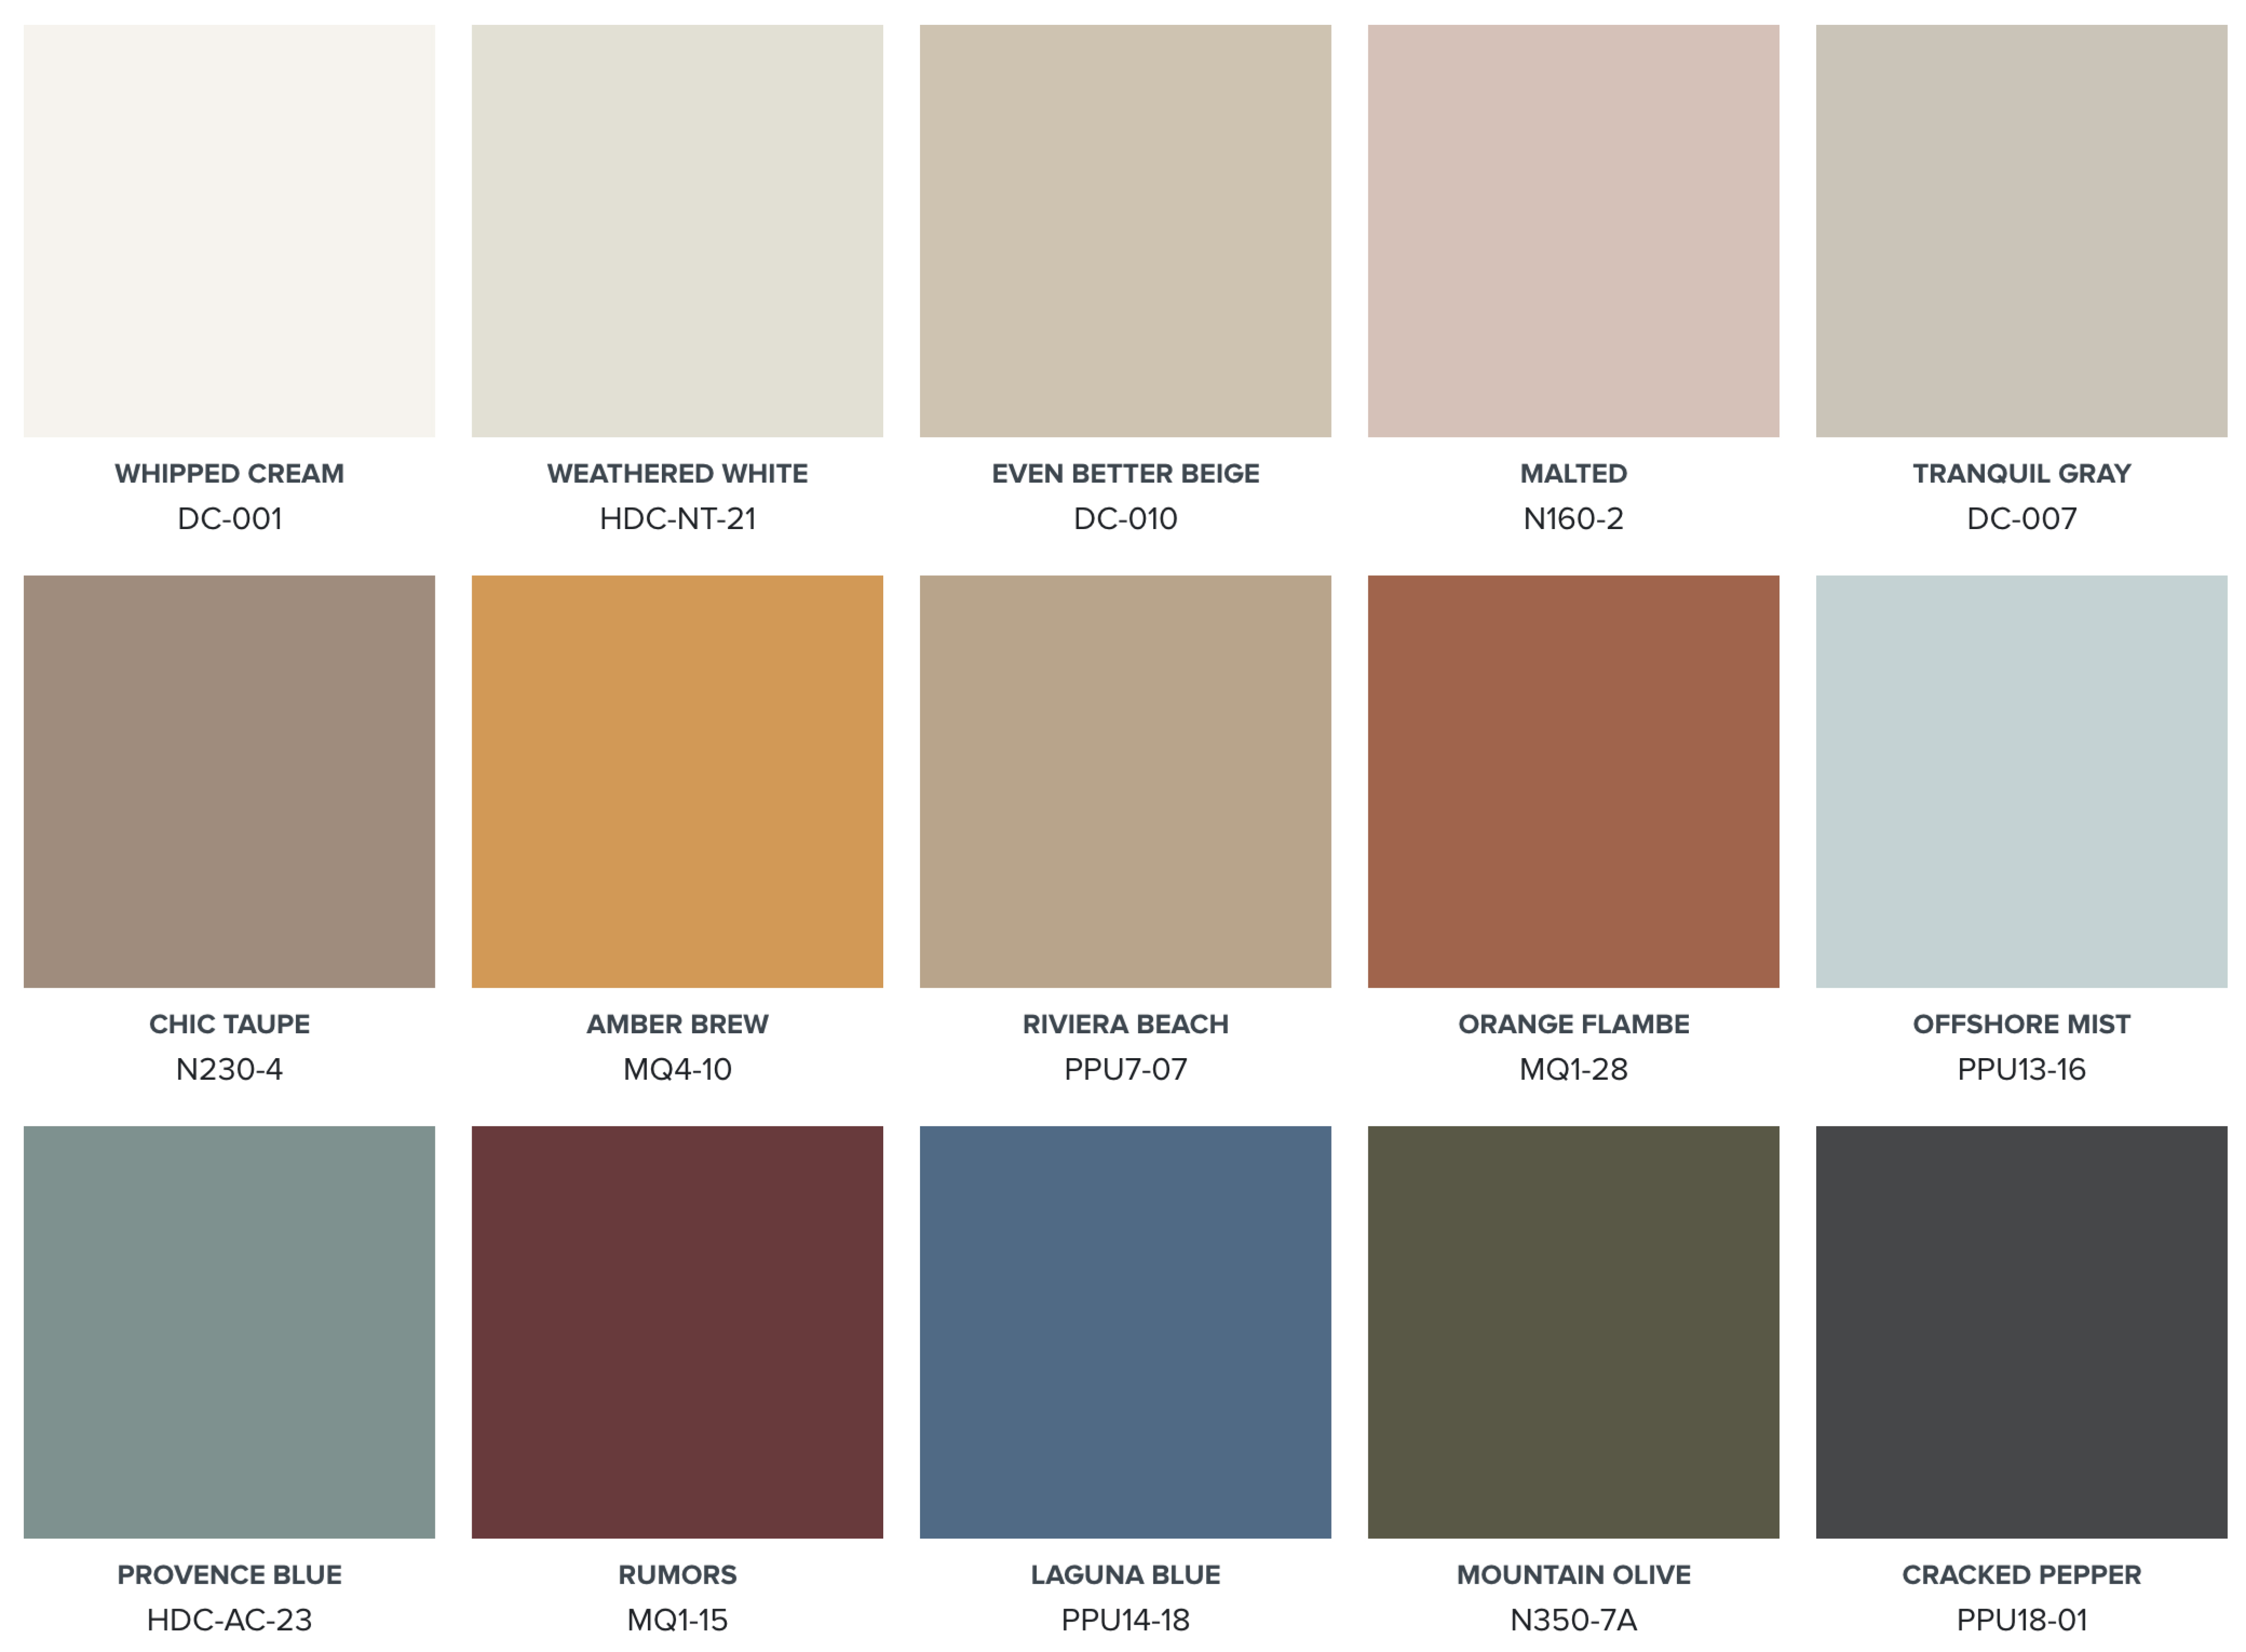 Colour chips of the BEHR 2024 Colour Trends – Whipped Cream, Weathered White, Even Better Beige, Malted, Tranquil Gray, Chic Taupe, Amber Brew, Riviera Beach, Orange Flambe, Offshore Mist, Provence Blue, Rumors, Laguna Blue, Mountain Olive, and Cracked Pepper 